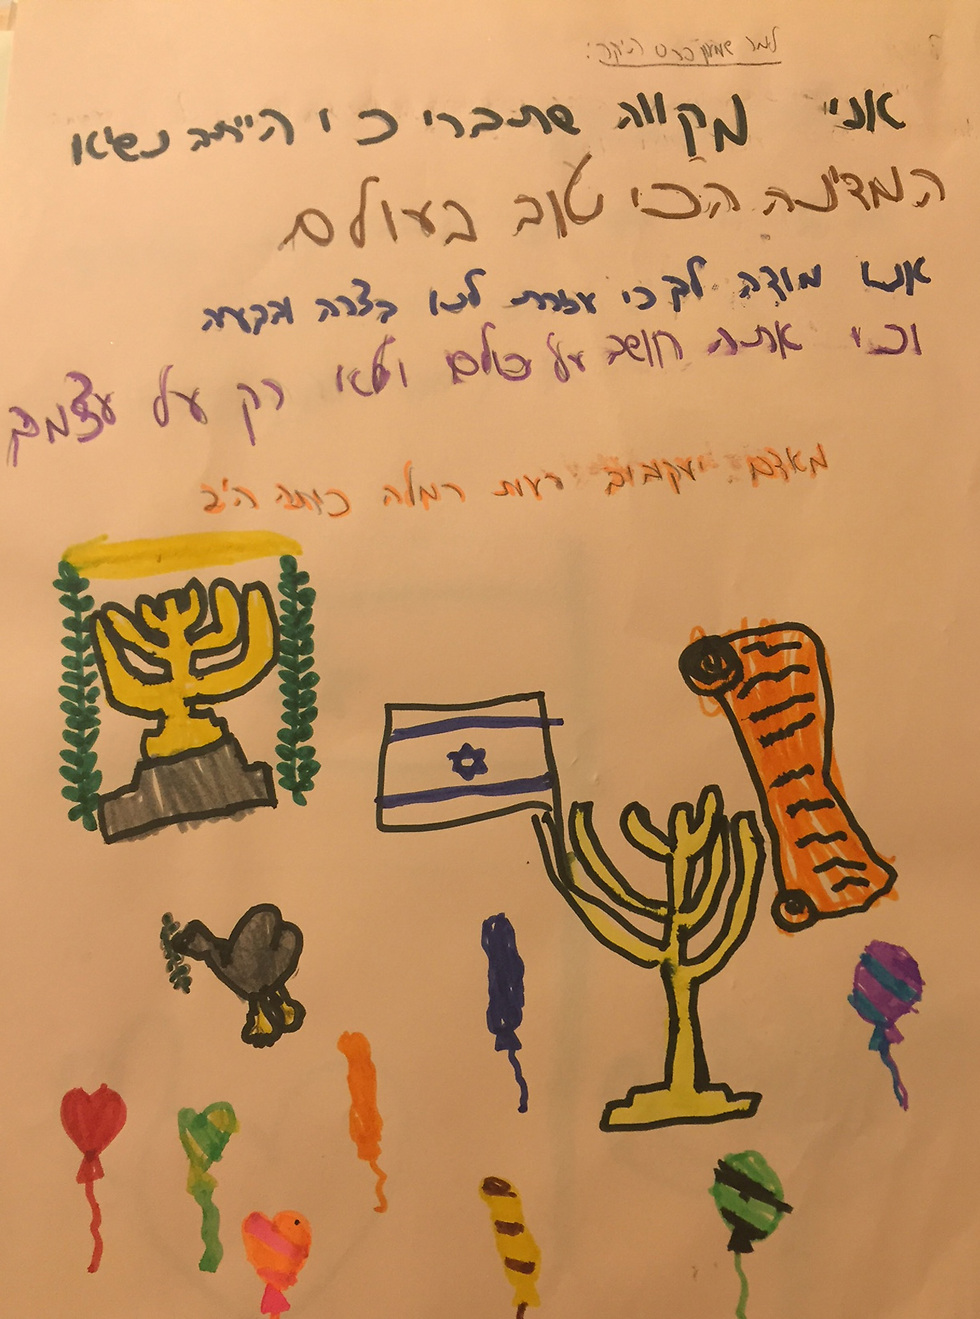 A letter from children wishing Shimon Peres a speedy recovery